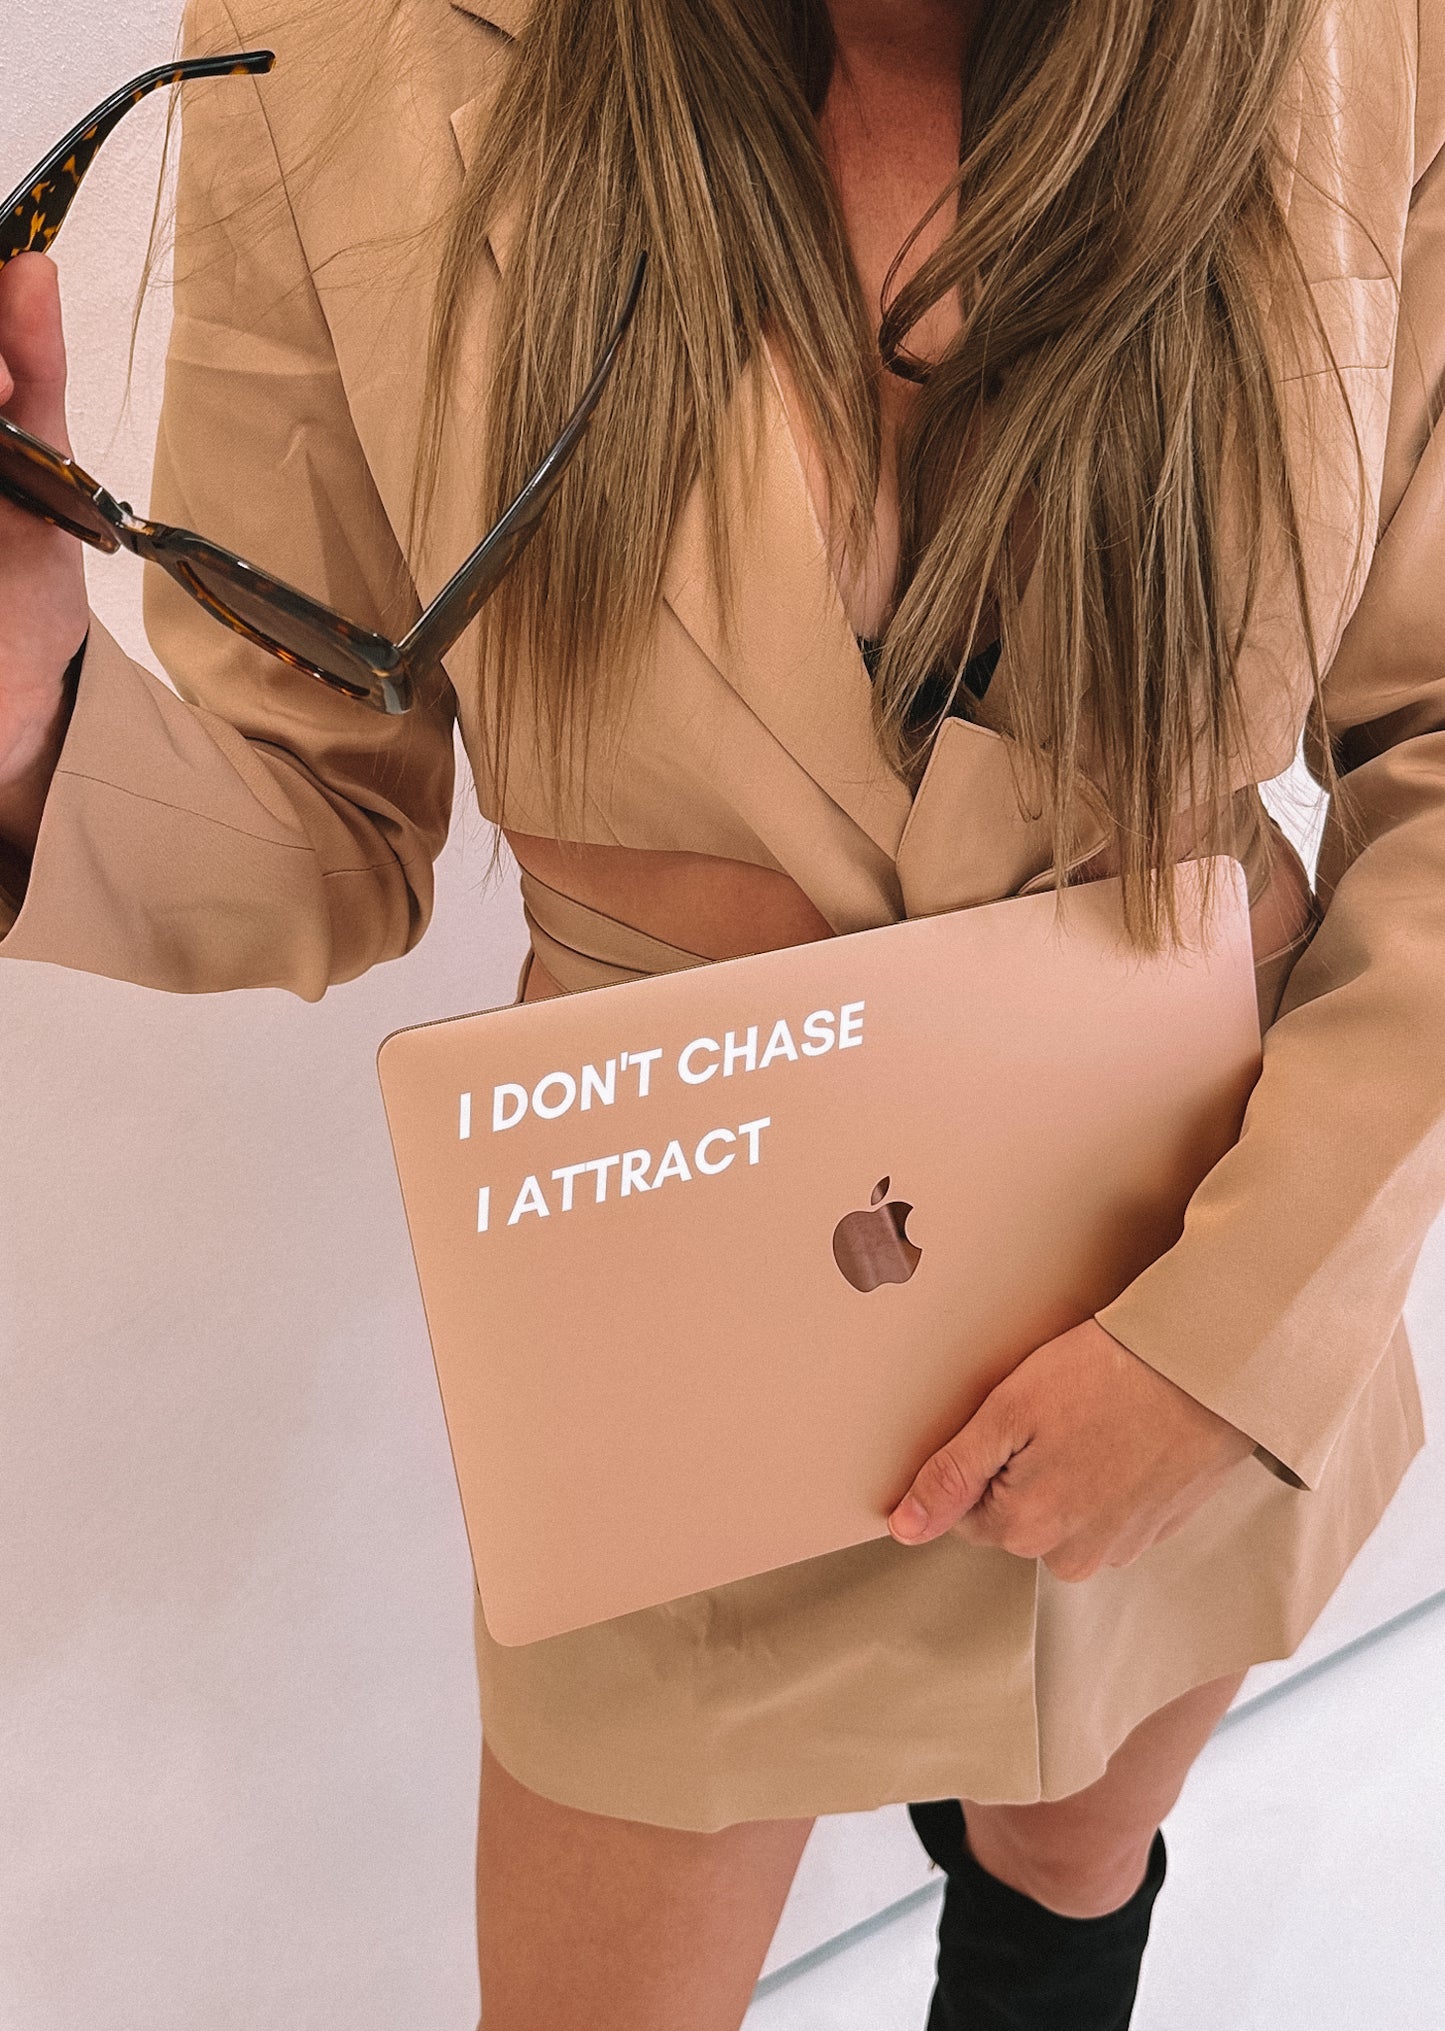 I don't chase, I attract - Decal